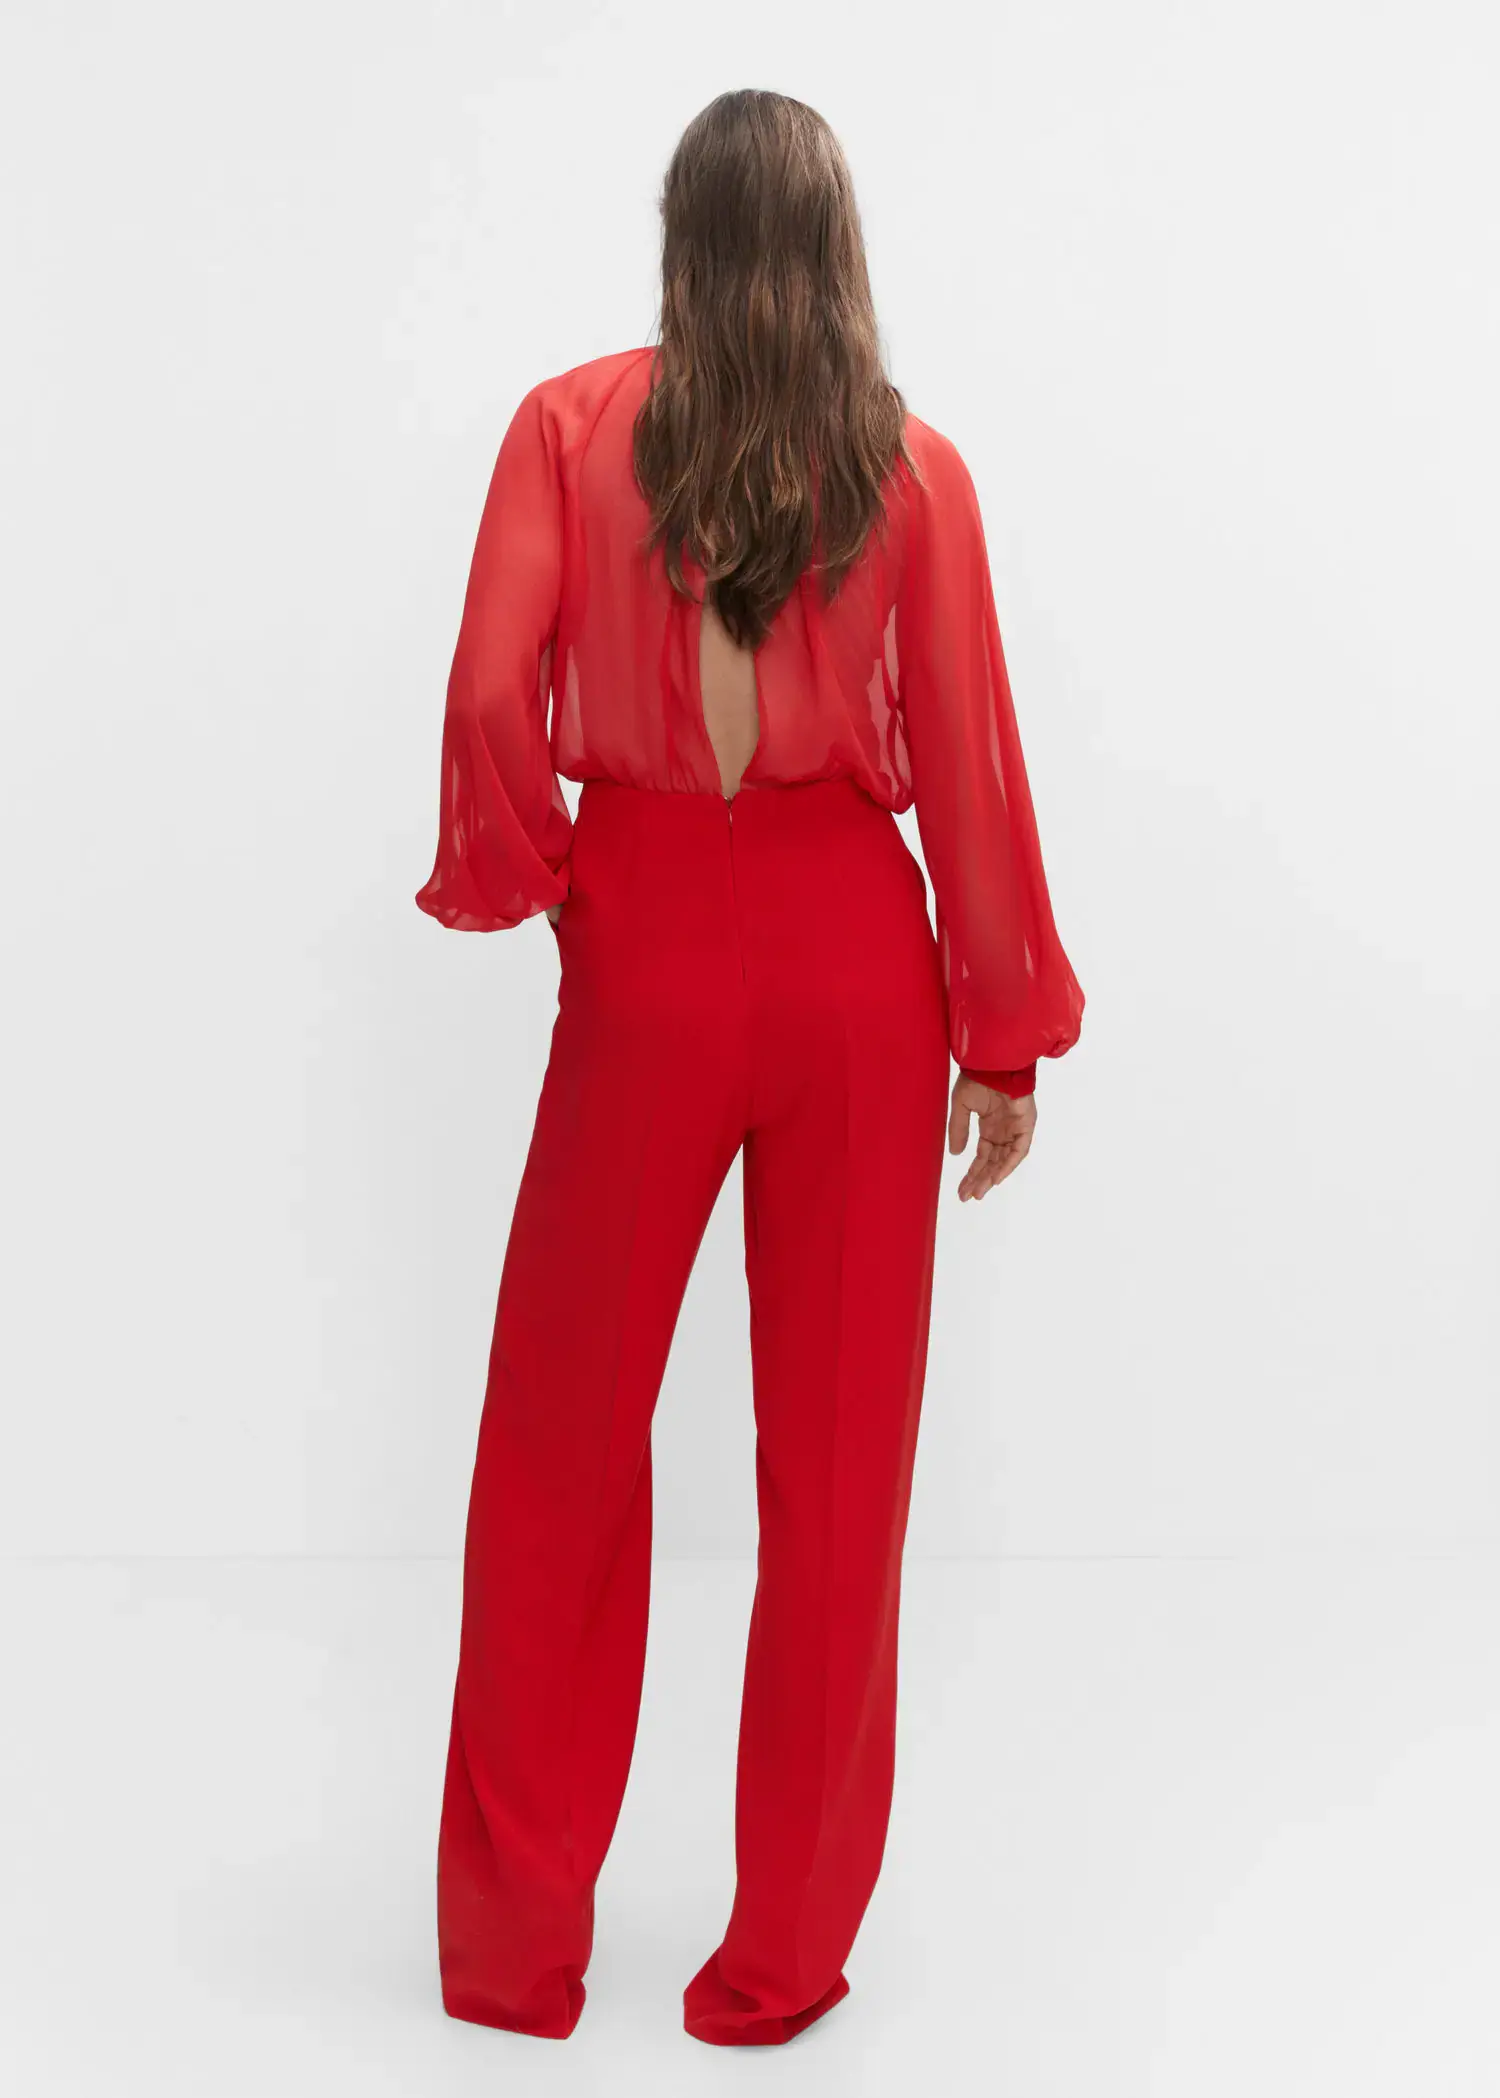 Mango Semi-transparent chiffon jumpsuit. a woman in a red outfit standing in front of a white wall. 